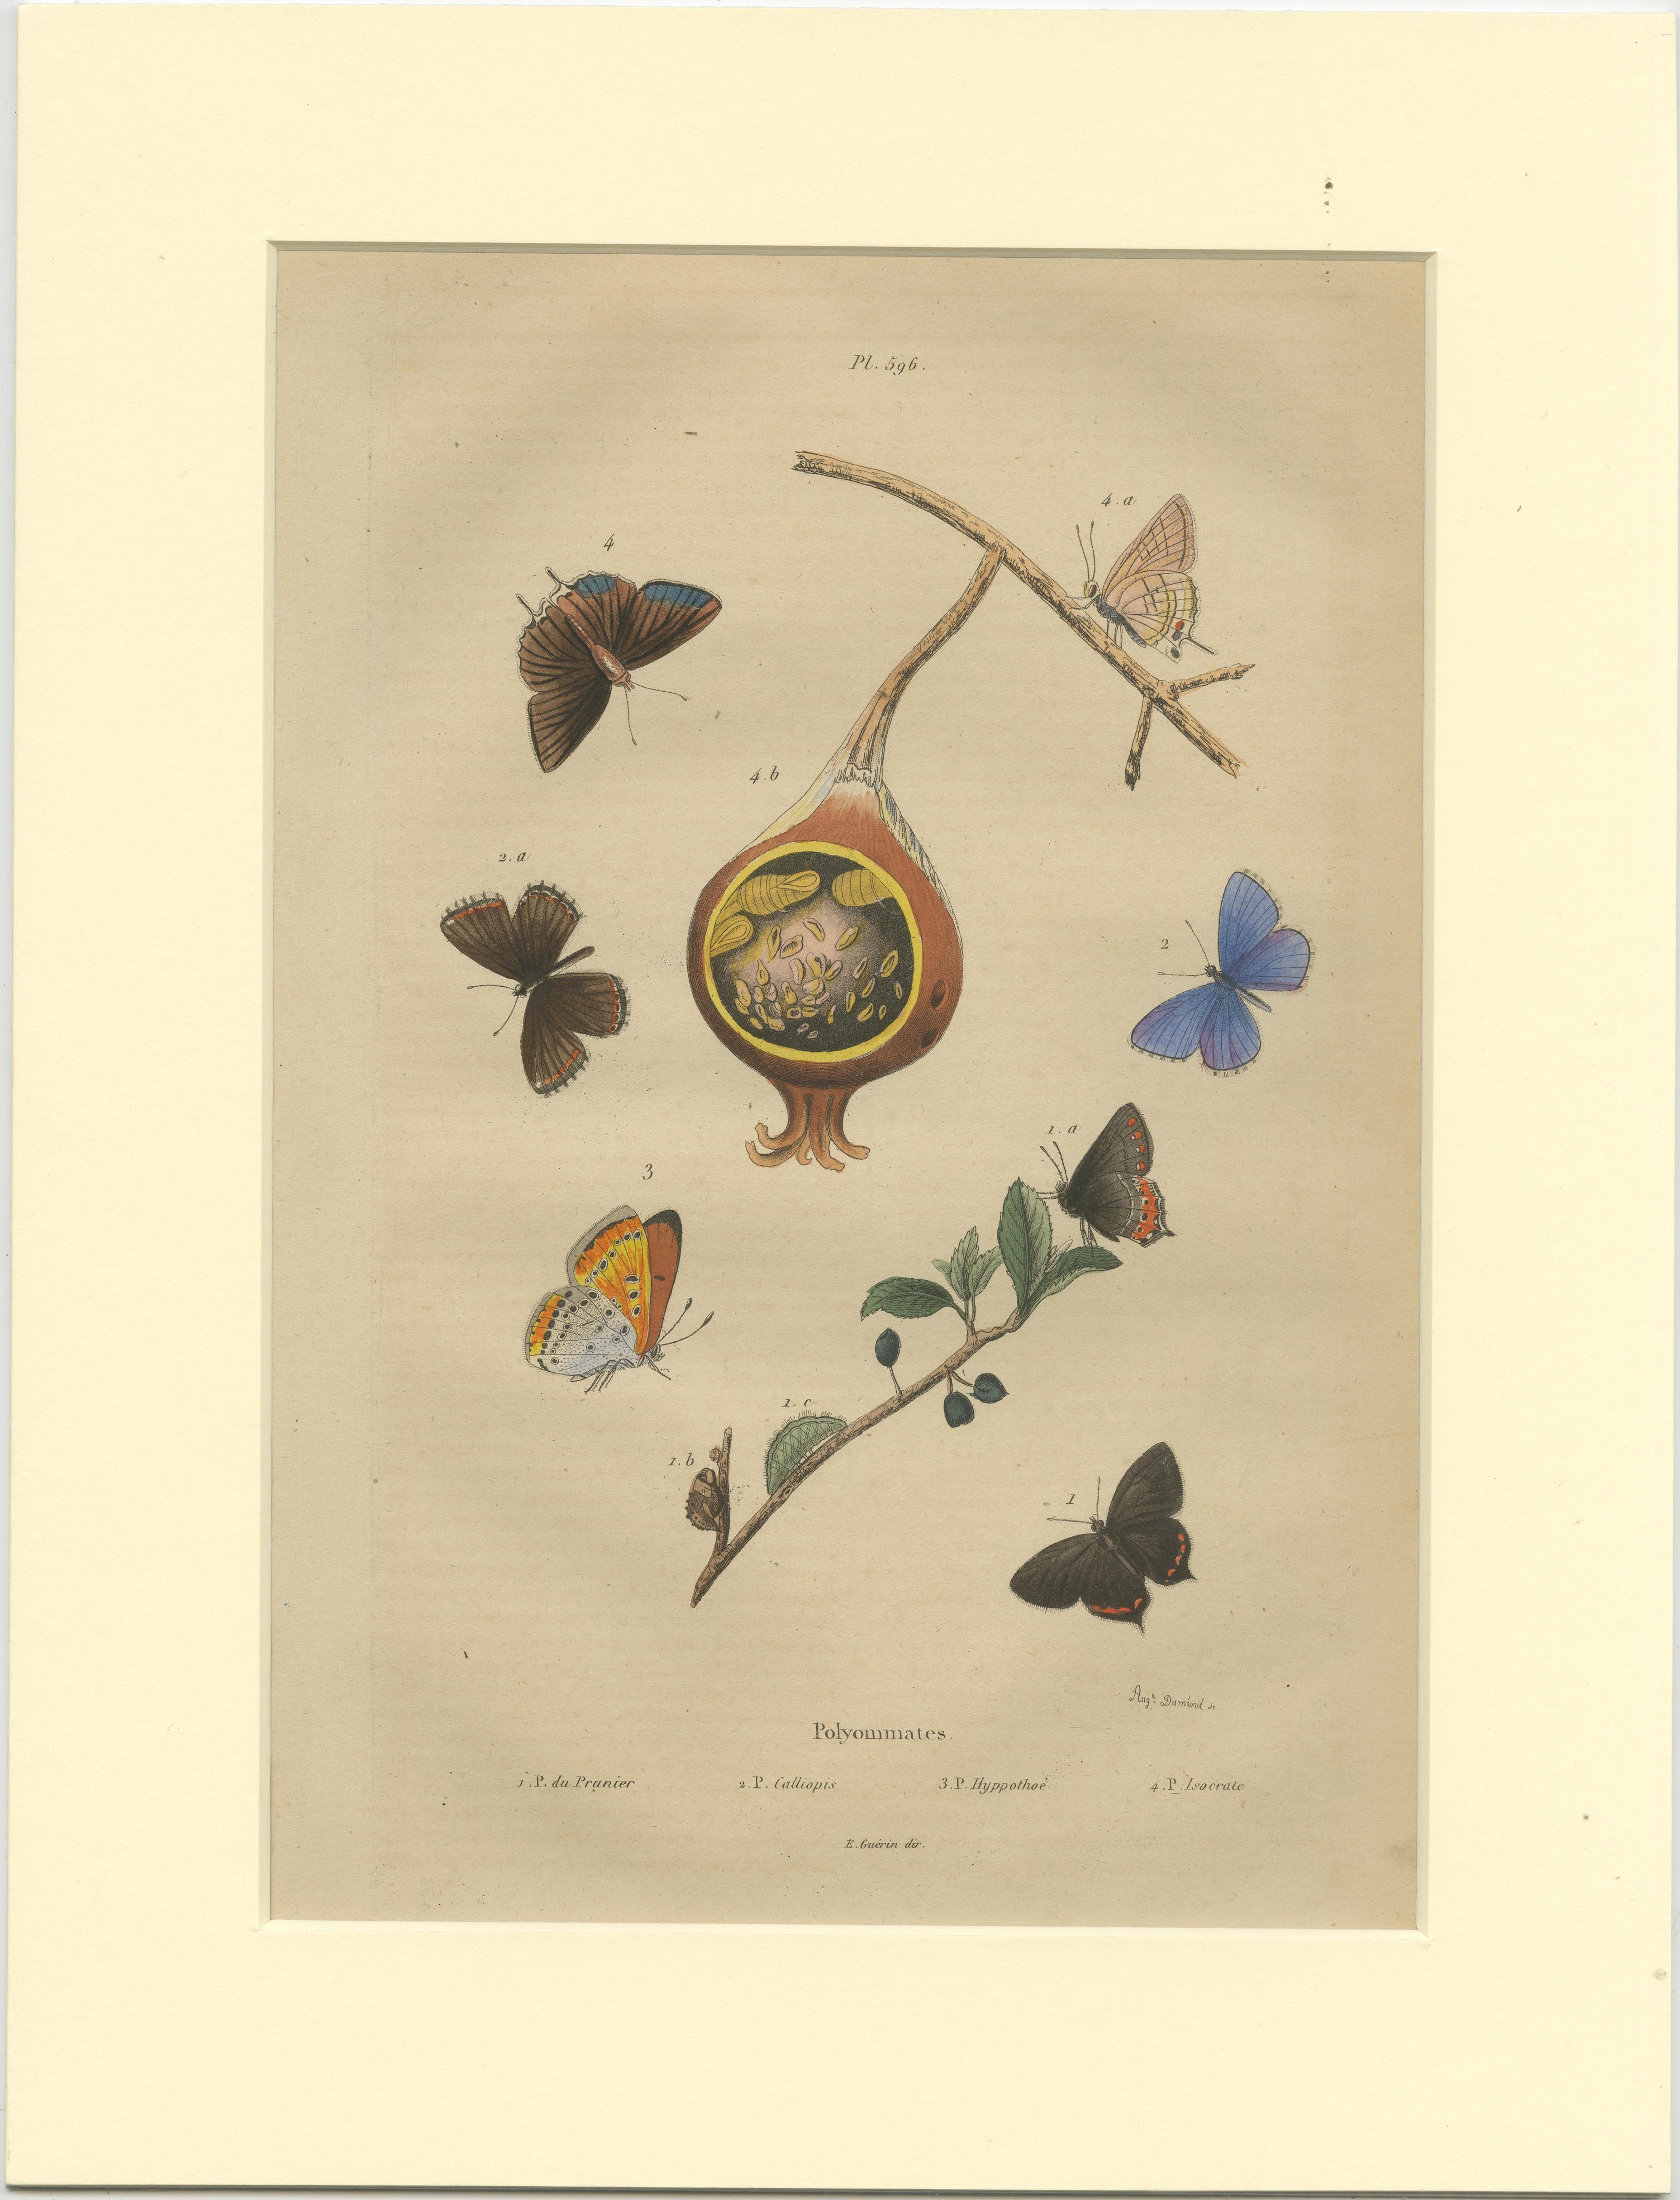 Antique print of the common blue and other butterflies. This print originates from 'Dictionnaire pittoresque d'Histoire Naturelle' by Adolph Felix-Edouard Guerin-Meneville de frites. Published in Paris, 1834-39.

Passepartout / matting included.